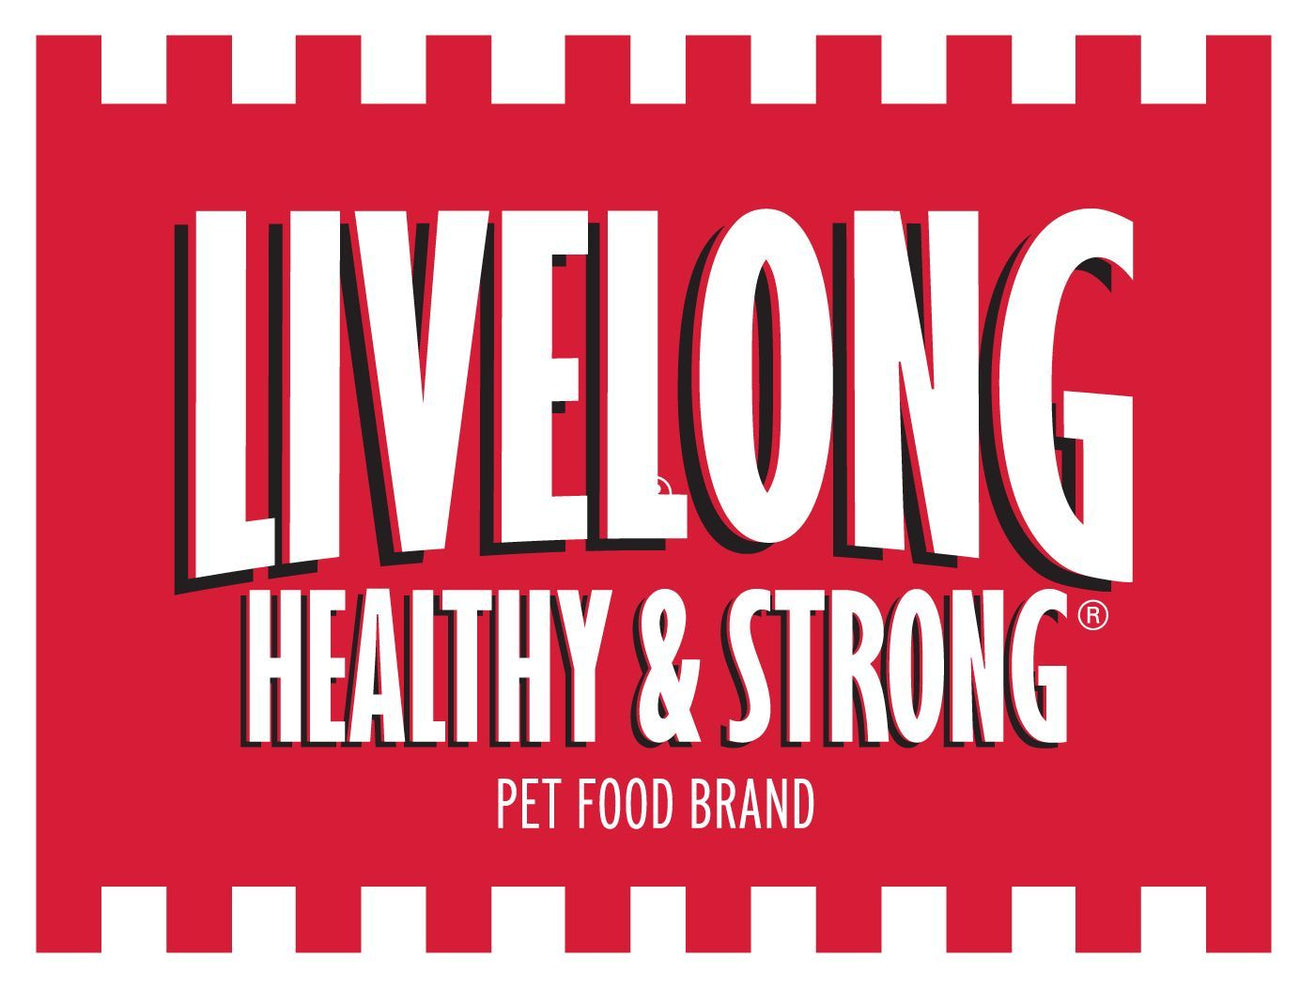 Livelong Healthy and Strong